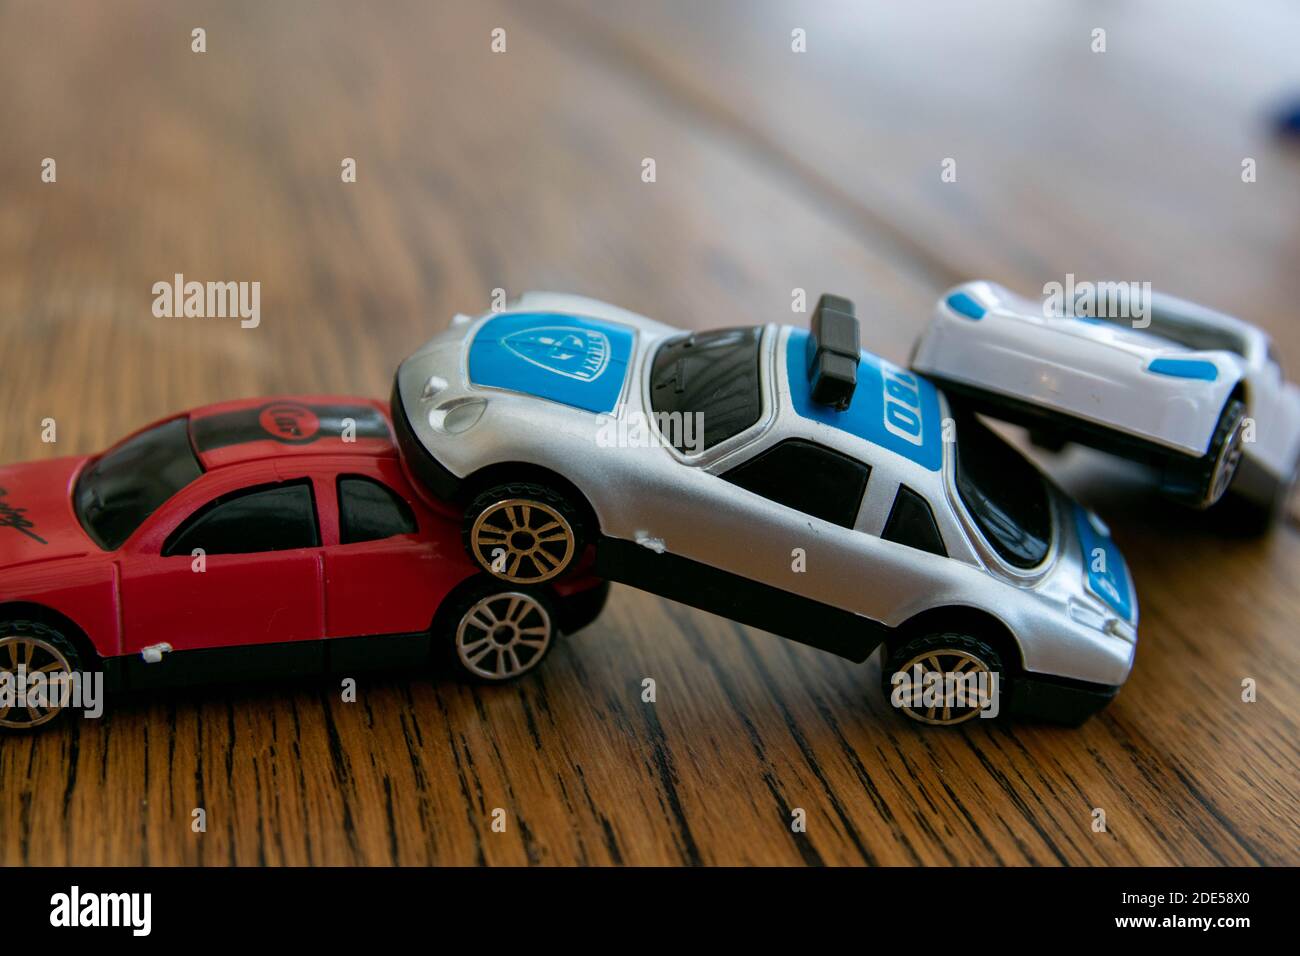 Plastic toys representing a car collision. 3 car pile up, crash, damage, insurance claim, injury, drunk driving, safety whilst driving, bad drivers, d Stock Photo